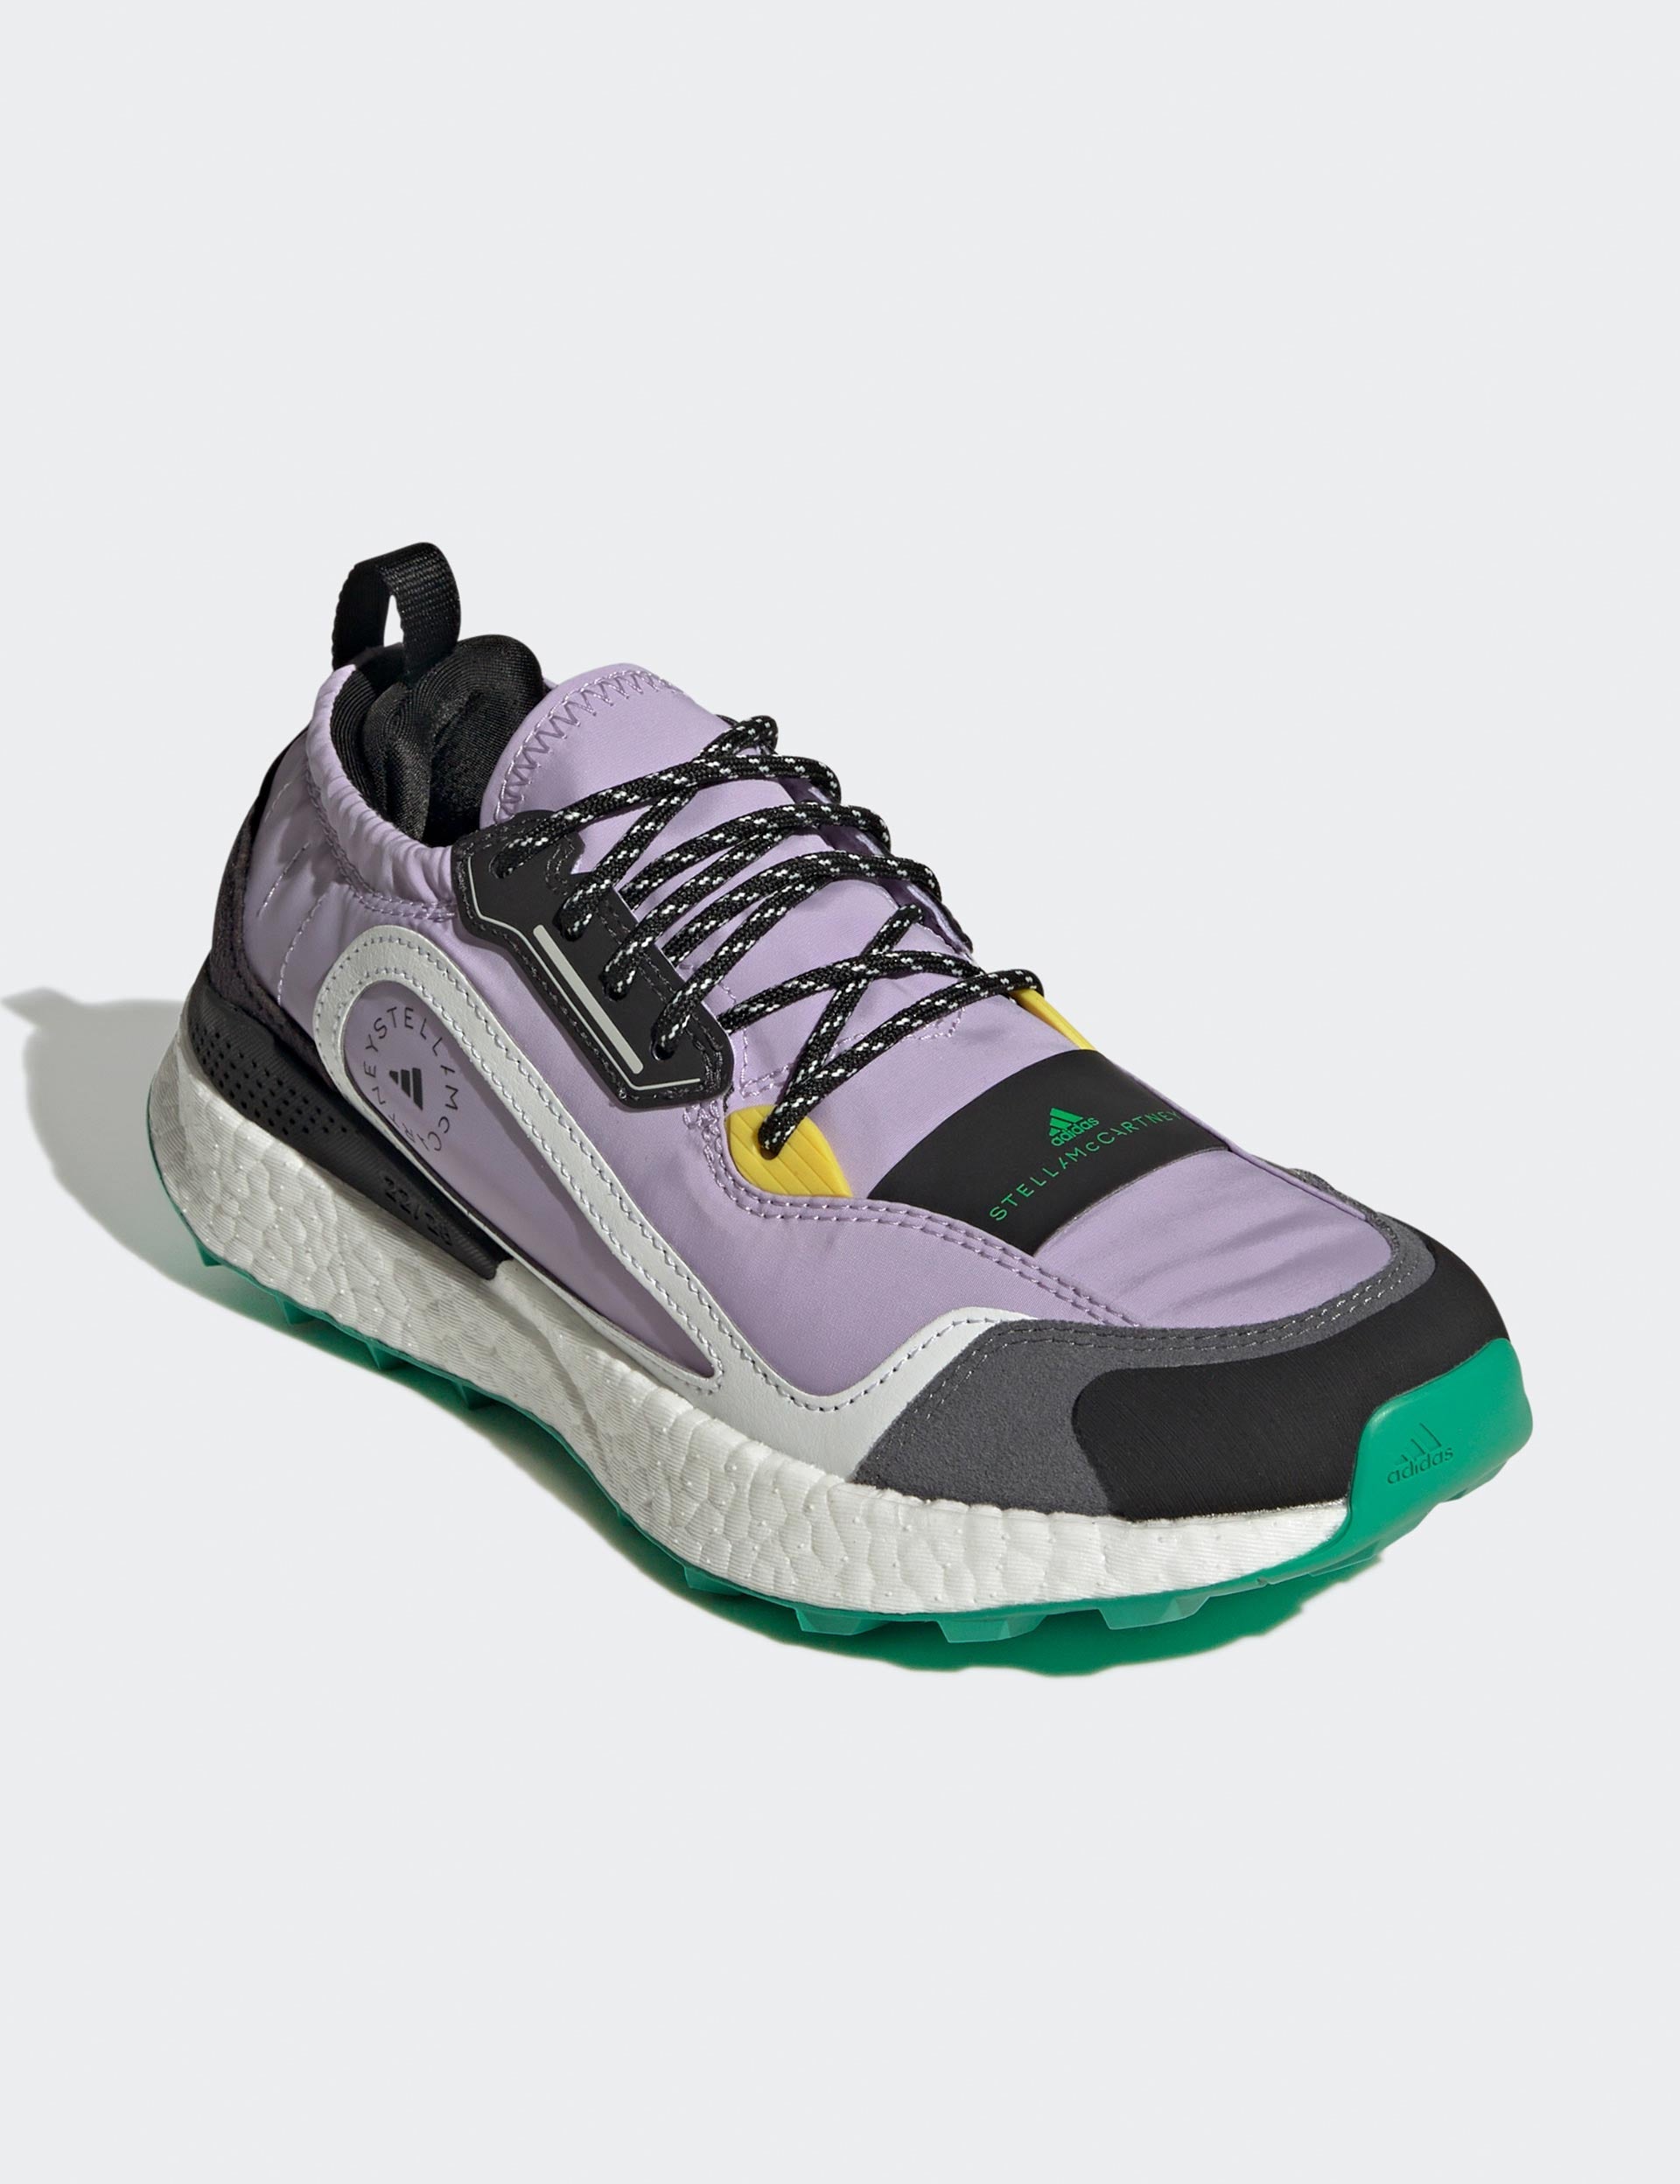 Outdoorboost 2.0 COLD.RDY Shoes - Shift Purple/Cloud White/Green